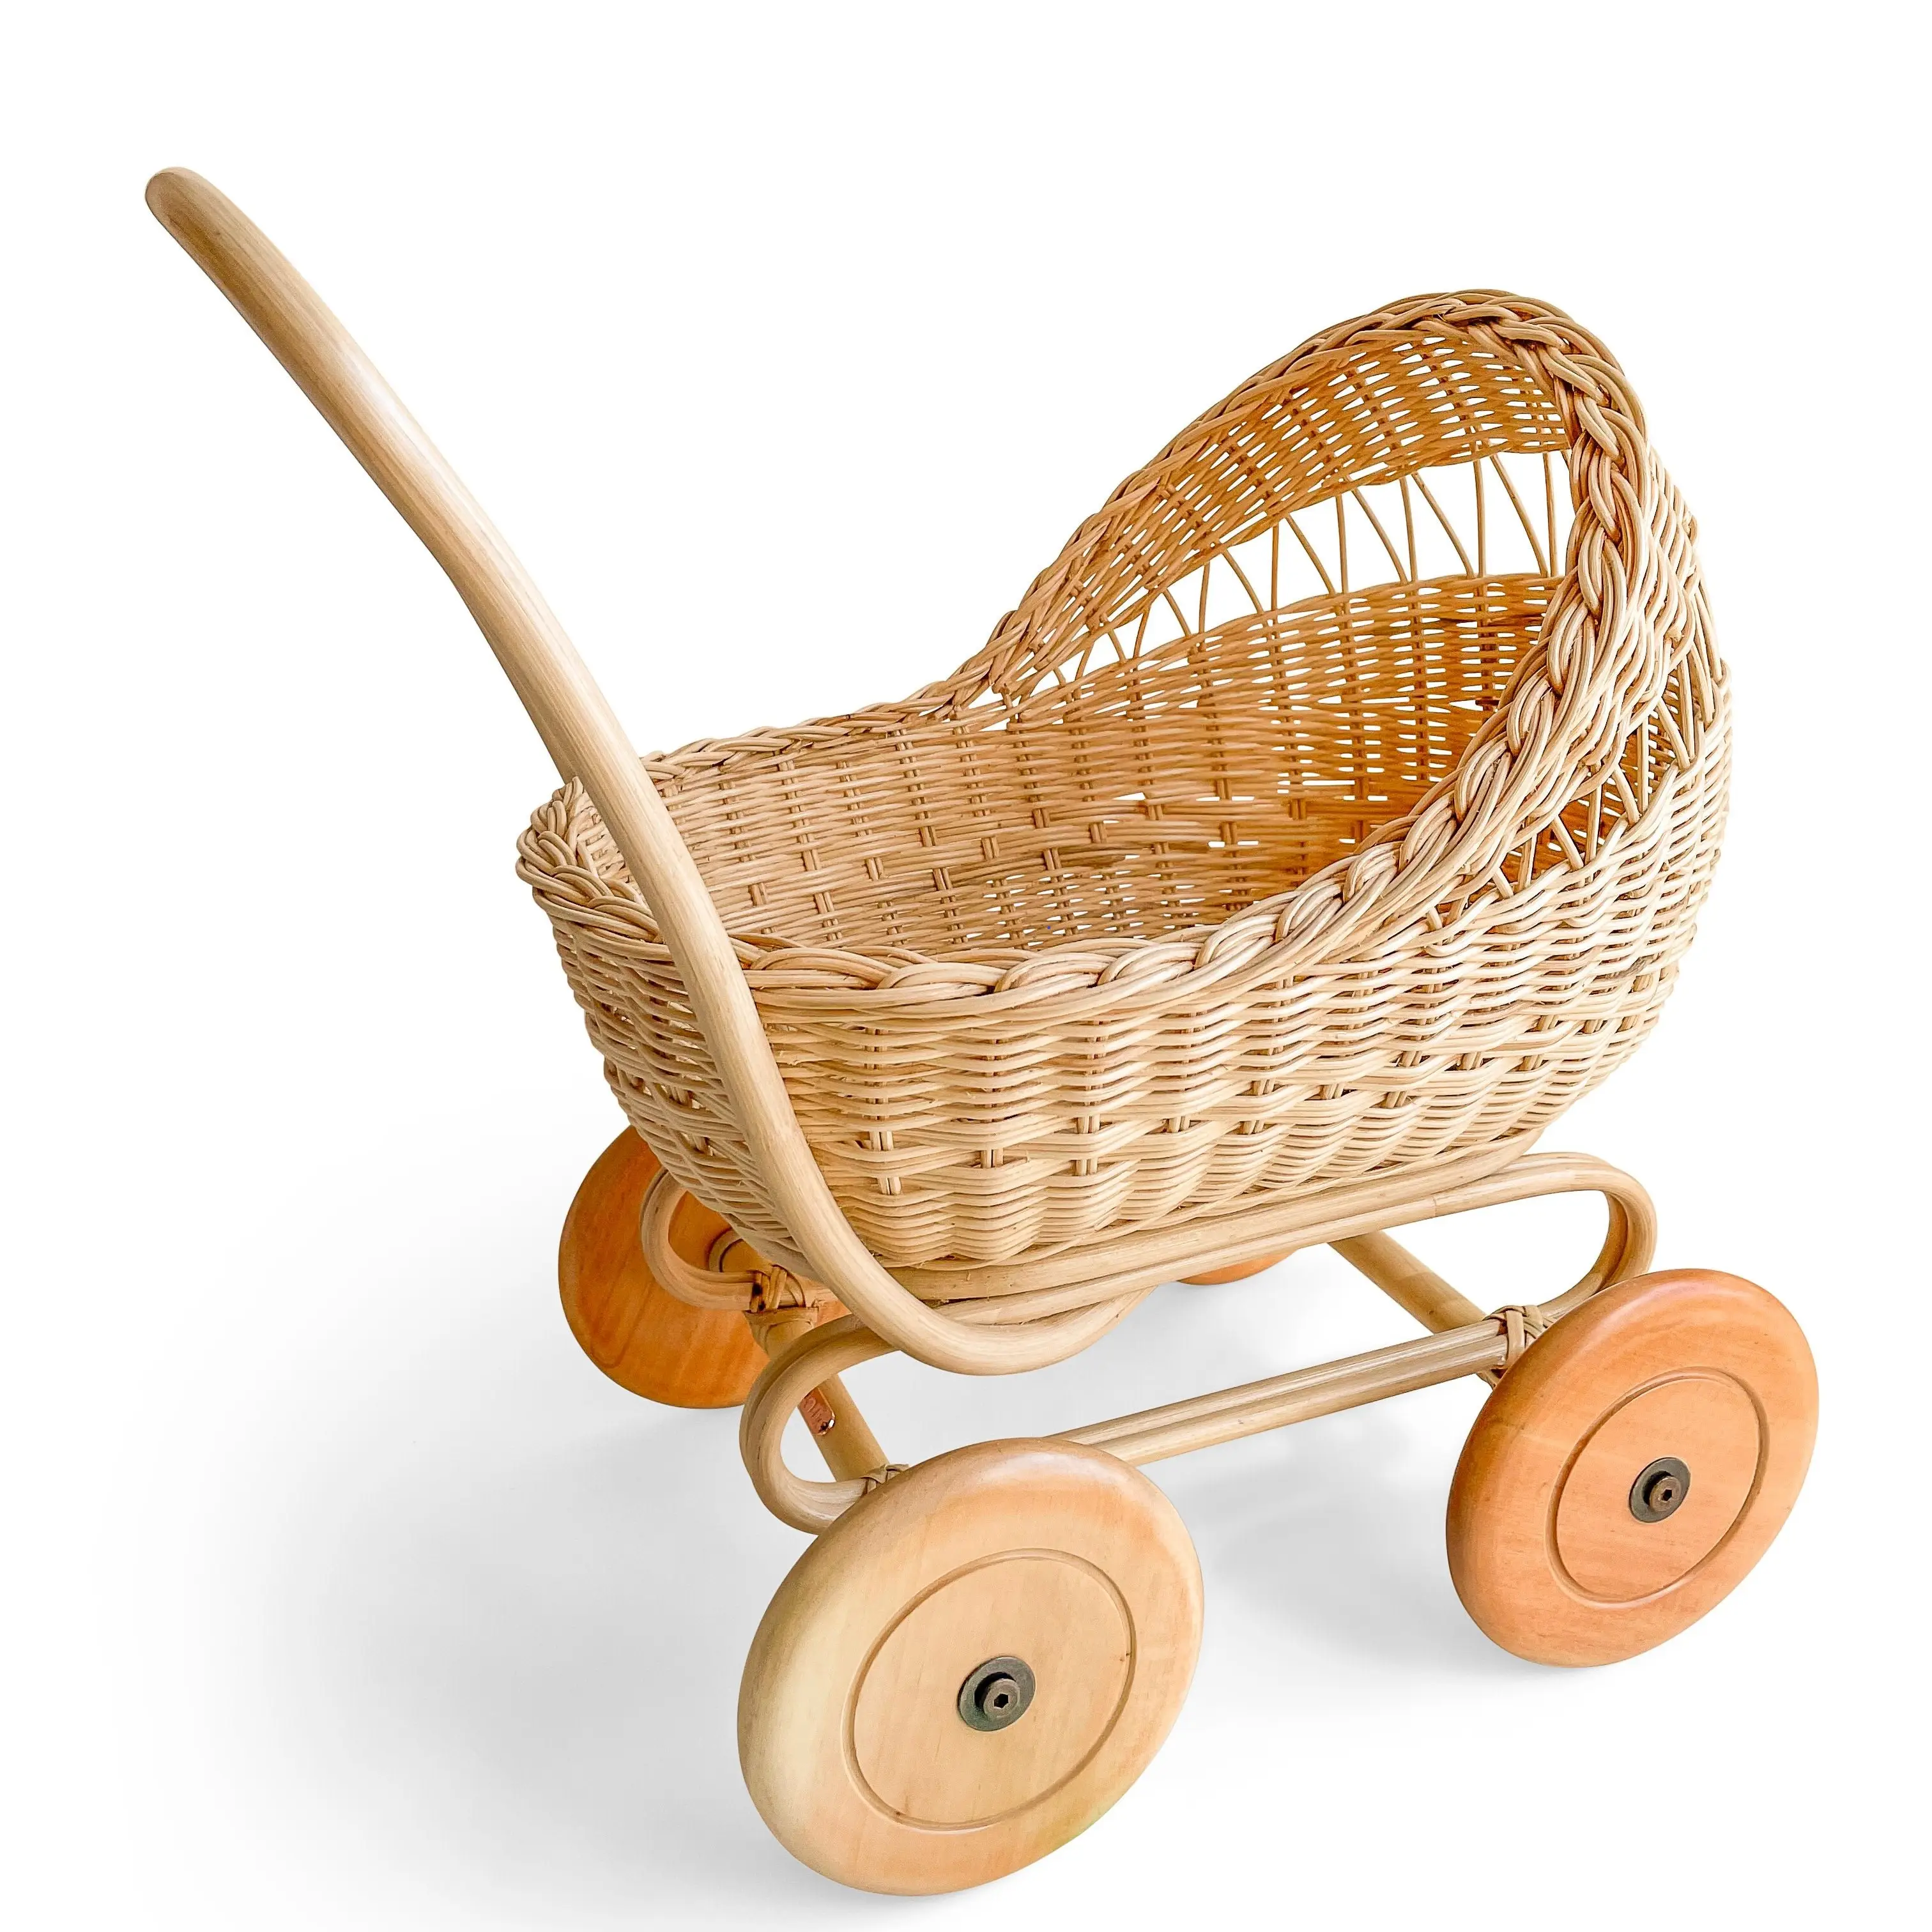 Cheap price wholesale handmade natural rattan baby stroller toy for dolls